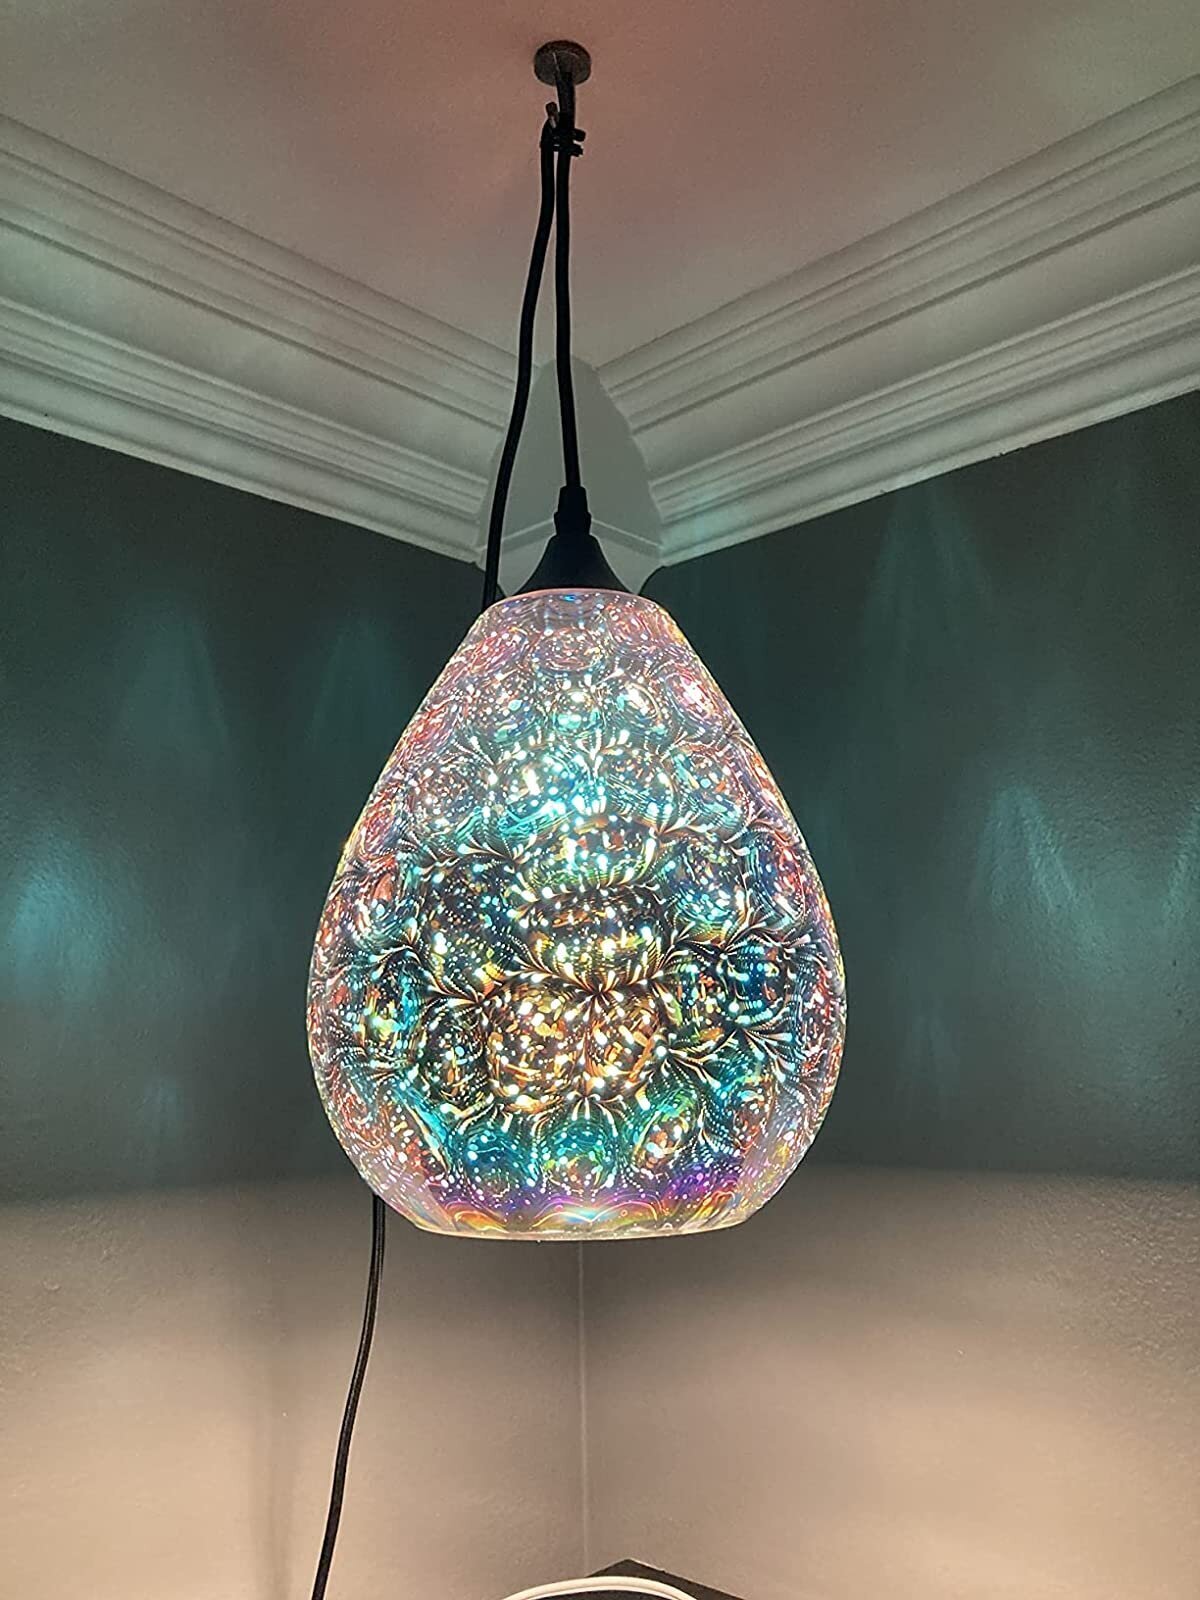 3D Stained Glass Lights